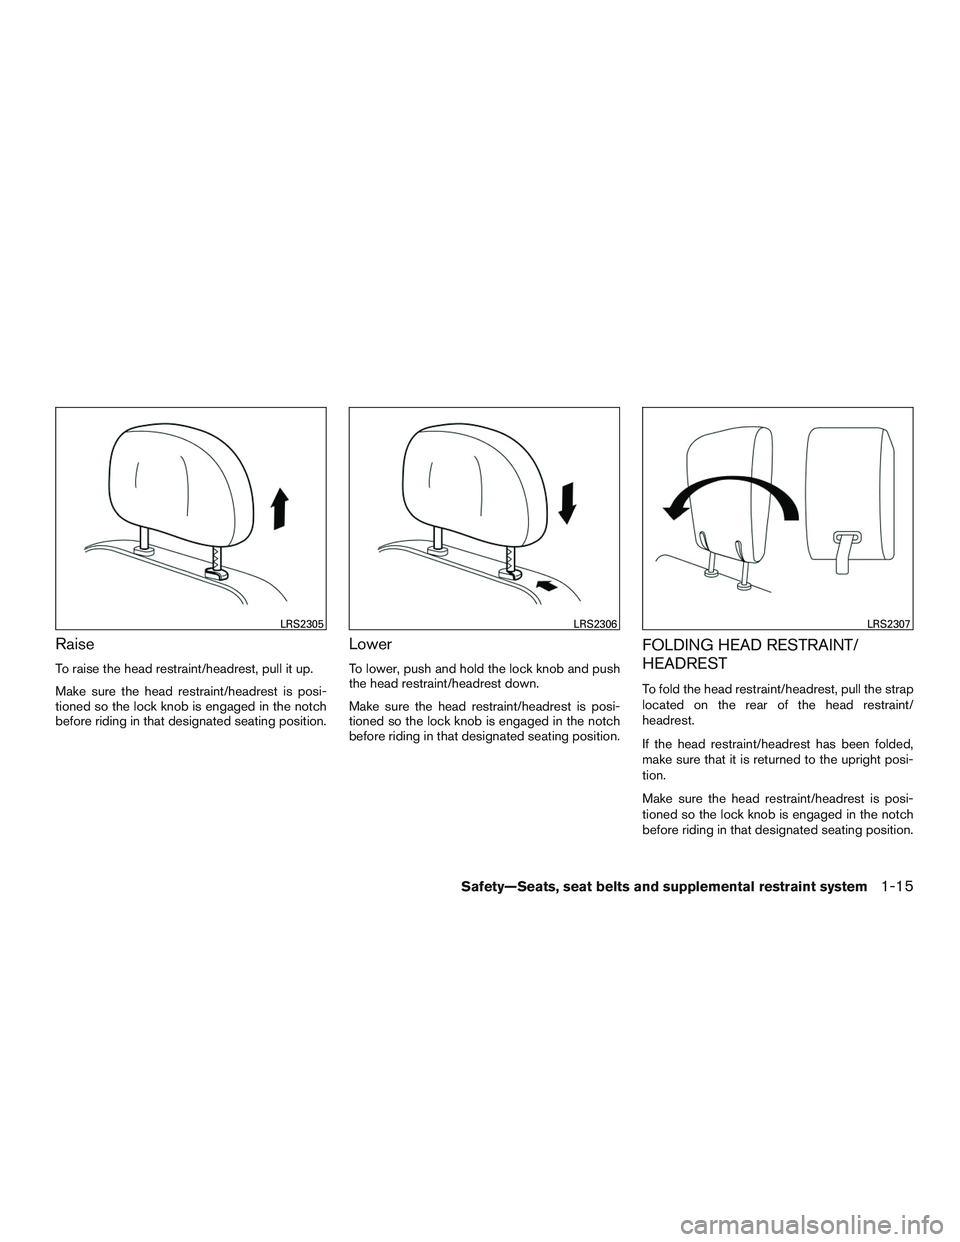 INFINITI QX60 2015  Owners Manual Raise
To raise the head restraint/headrest, pull it up.
Make sure the head restraint/headrest is posi-
tioned so the lock knob is engaged in the notch
before riding in that designated seating position